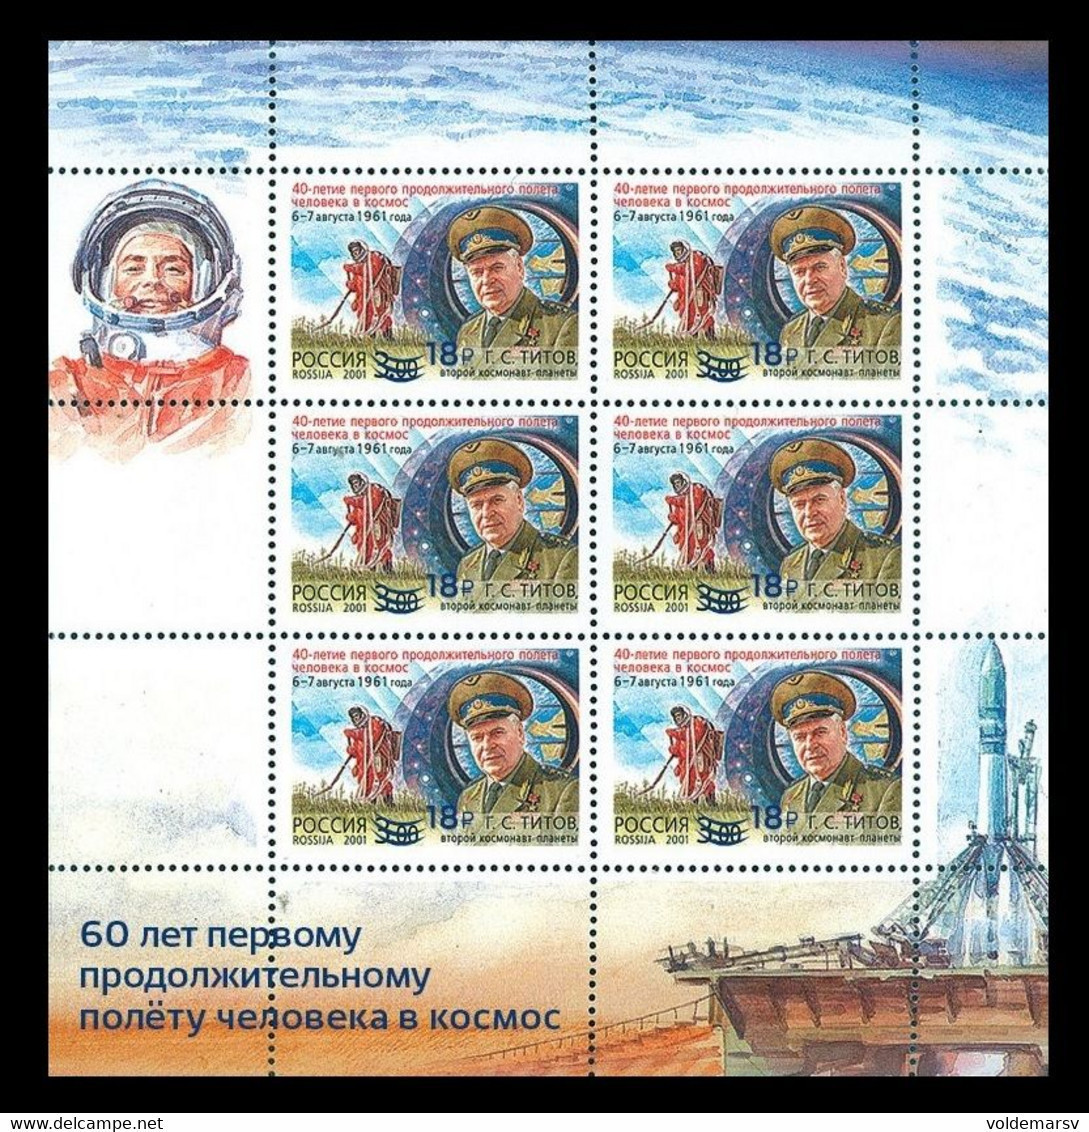 Russia 2021 Mih. 3022 Gherman Titov Space Flight (overprint) (M/S) MNH ** - Unused Stamps